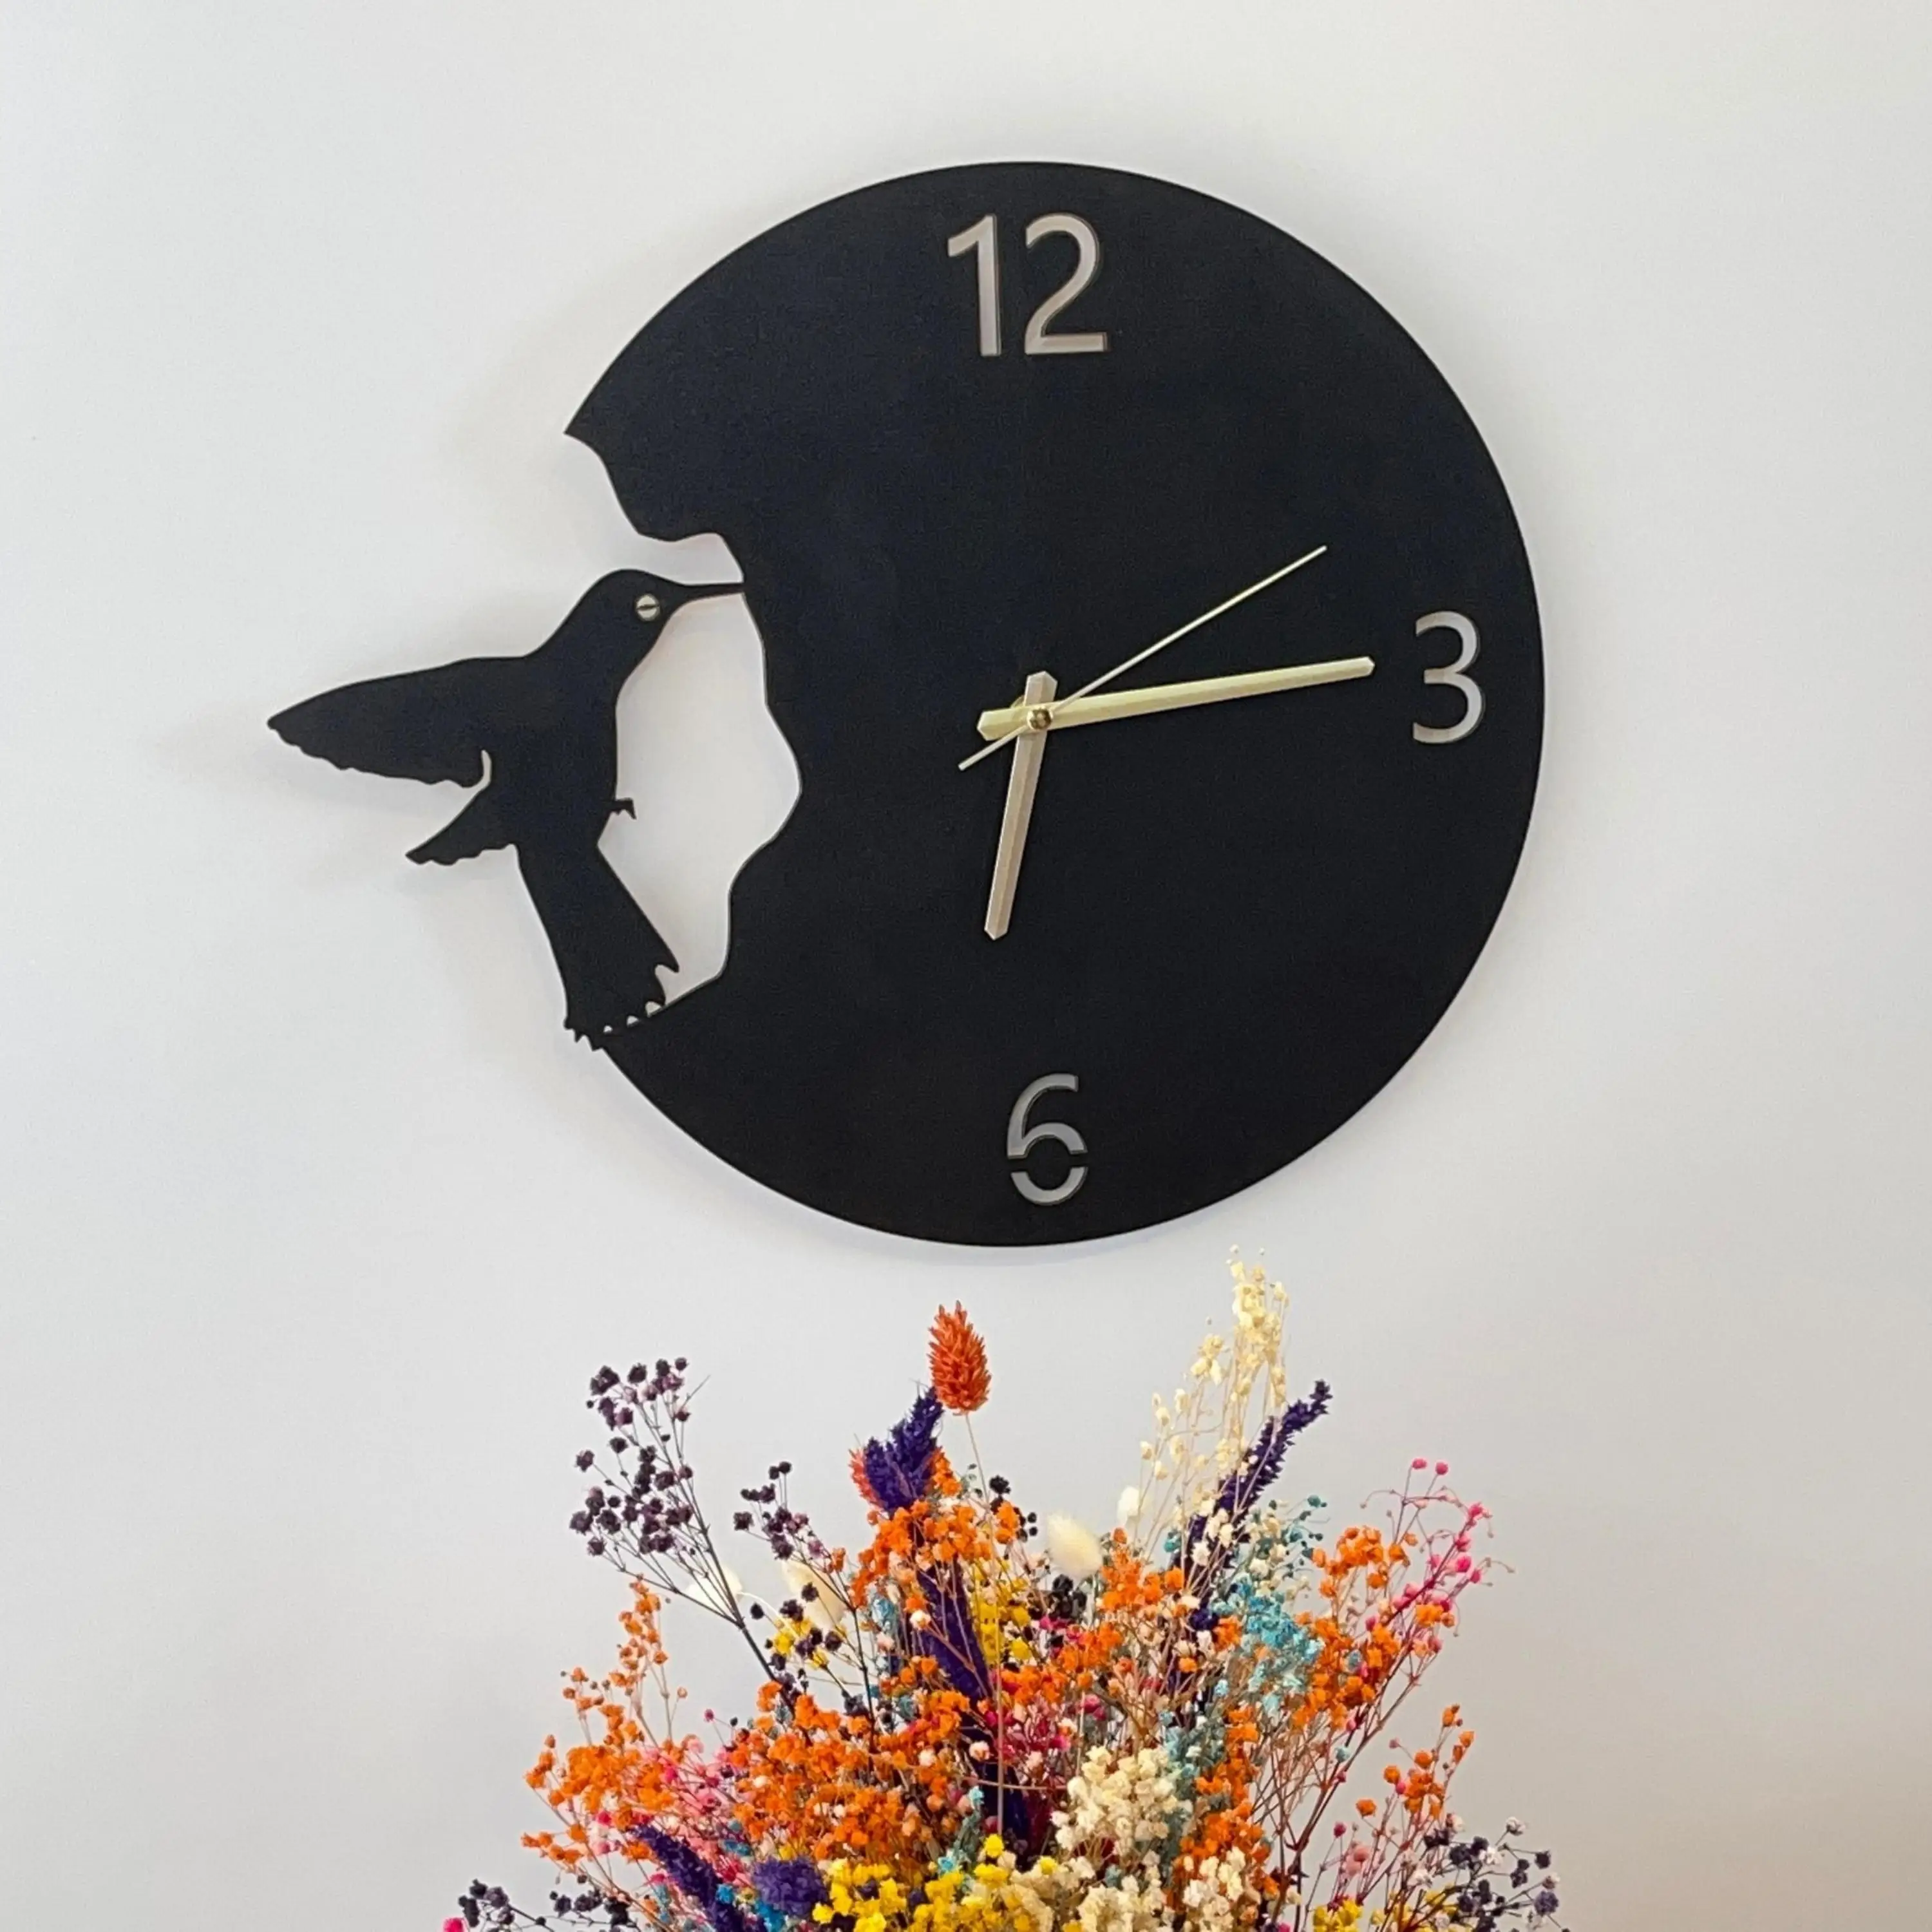 

Wooden Wall Clock Decorative Bird Themed Silent Mechanism Home Office Living Room Bedroom Kitchen Quality Gift Ideas Watch Modern Art Design Style Hour Timer New Creative Stylish Ornament Classic Beautiful Cute